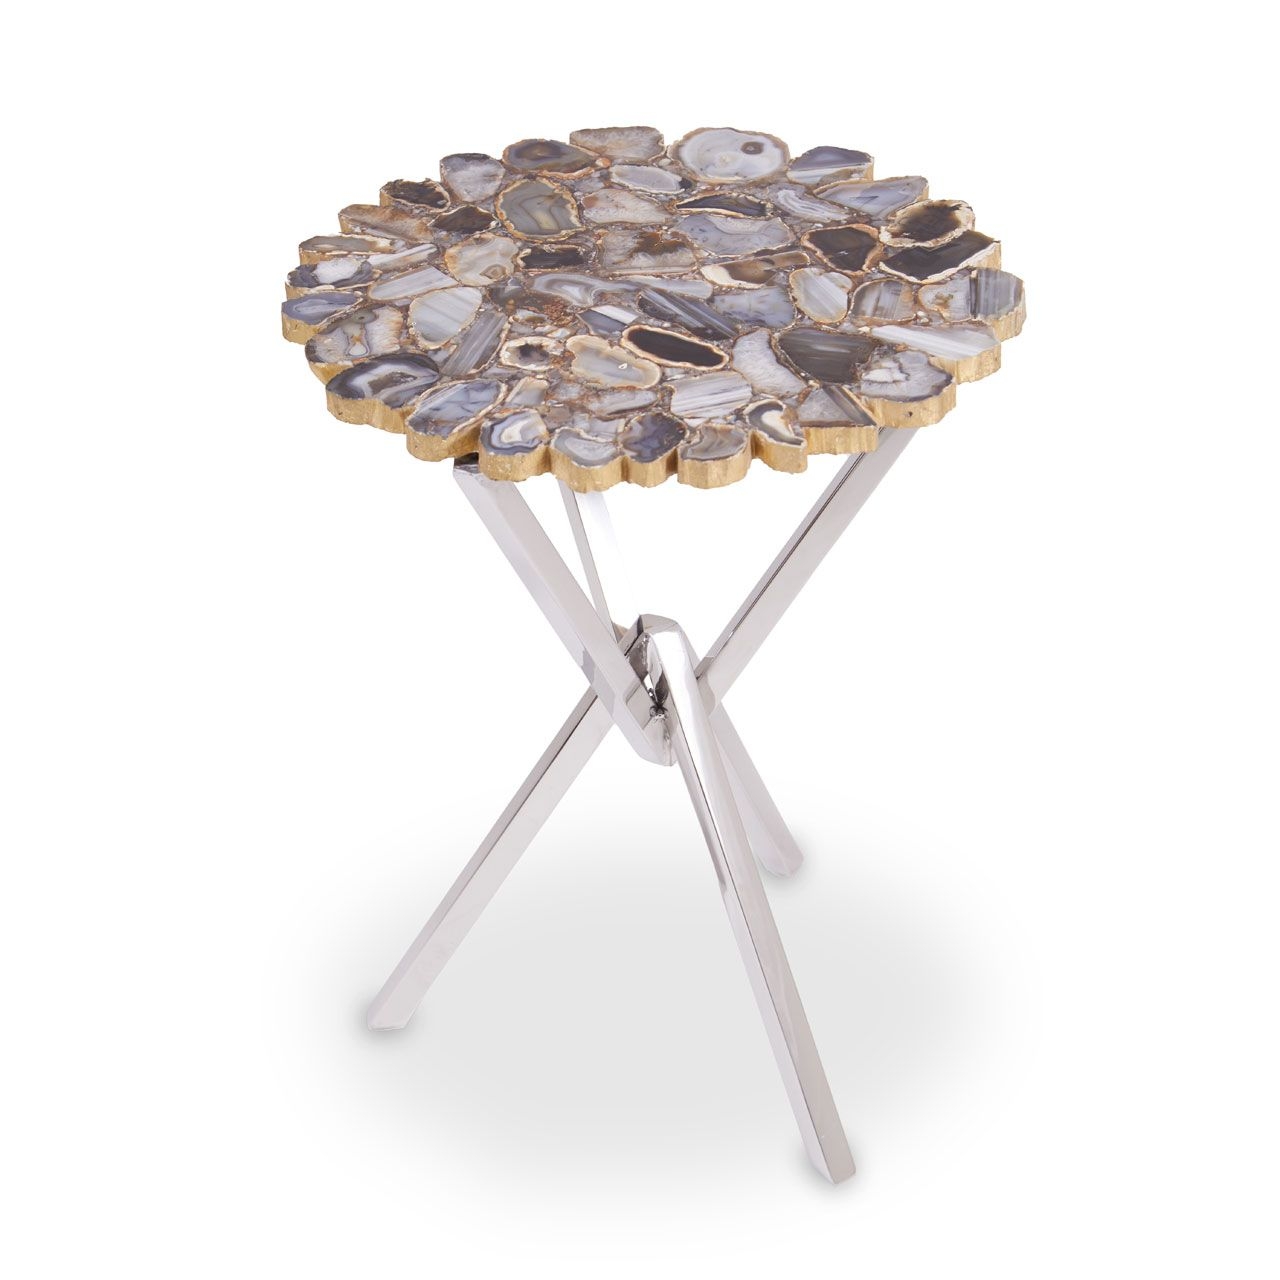 Rabia Stone Coffee Table In Agate With Cross Metal Base